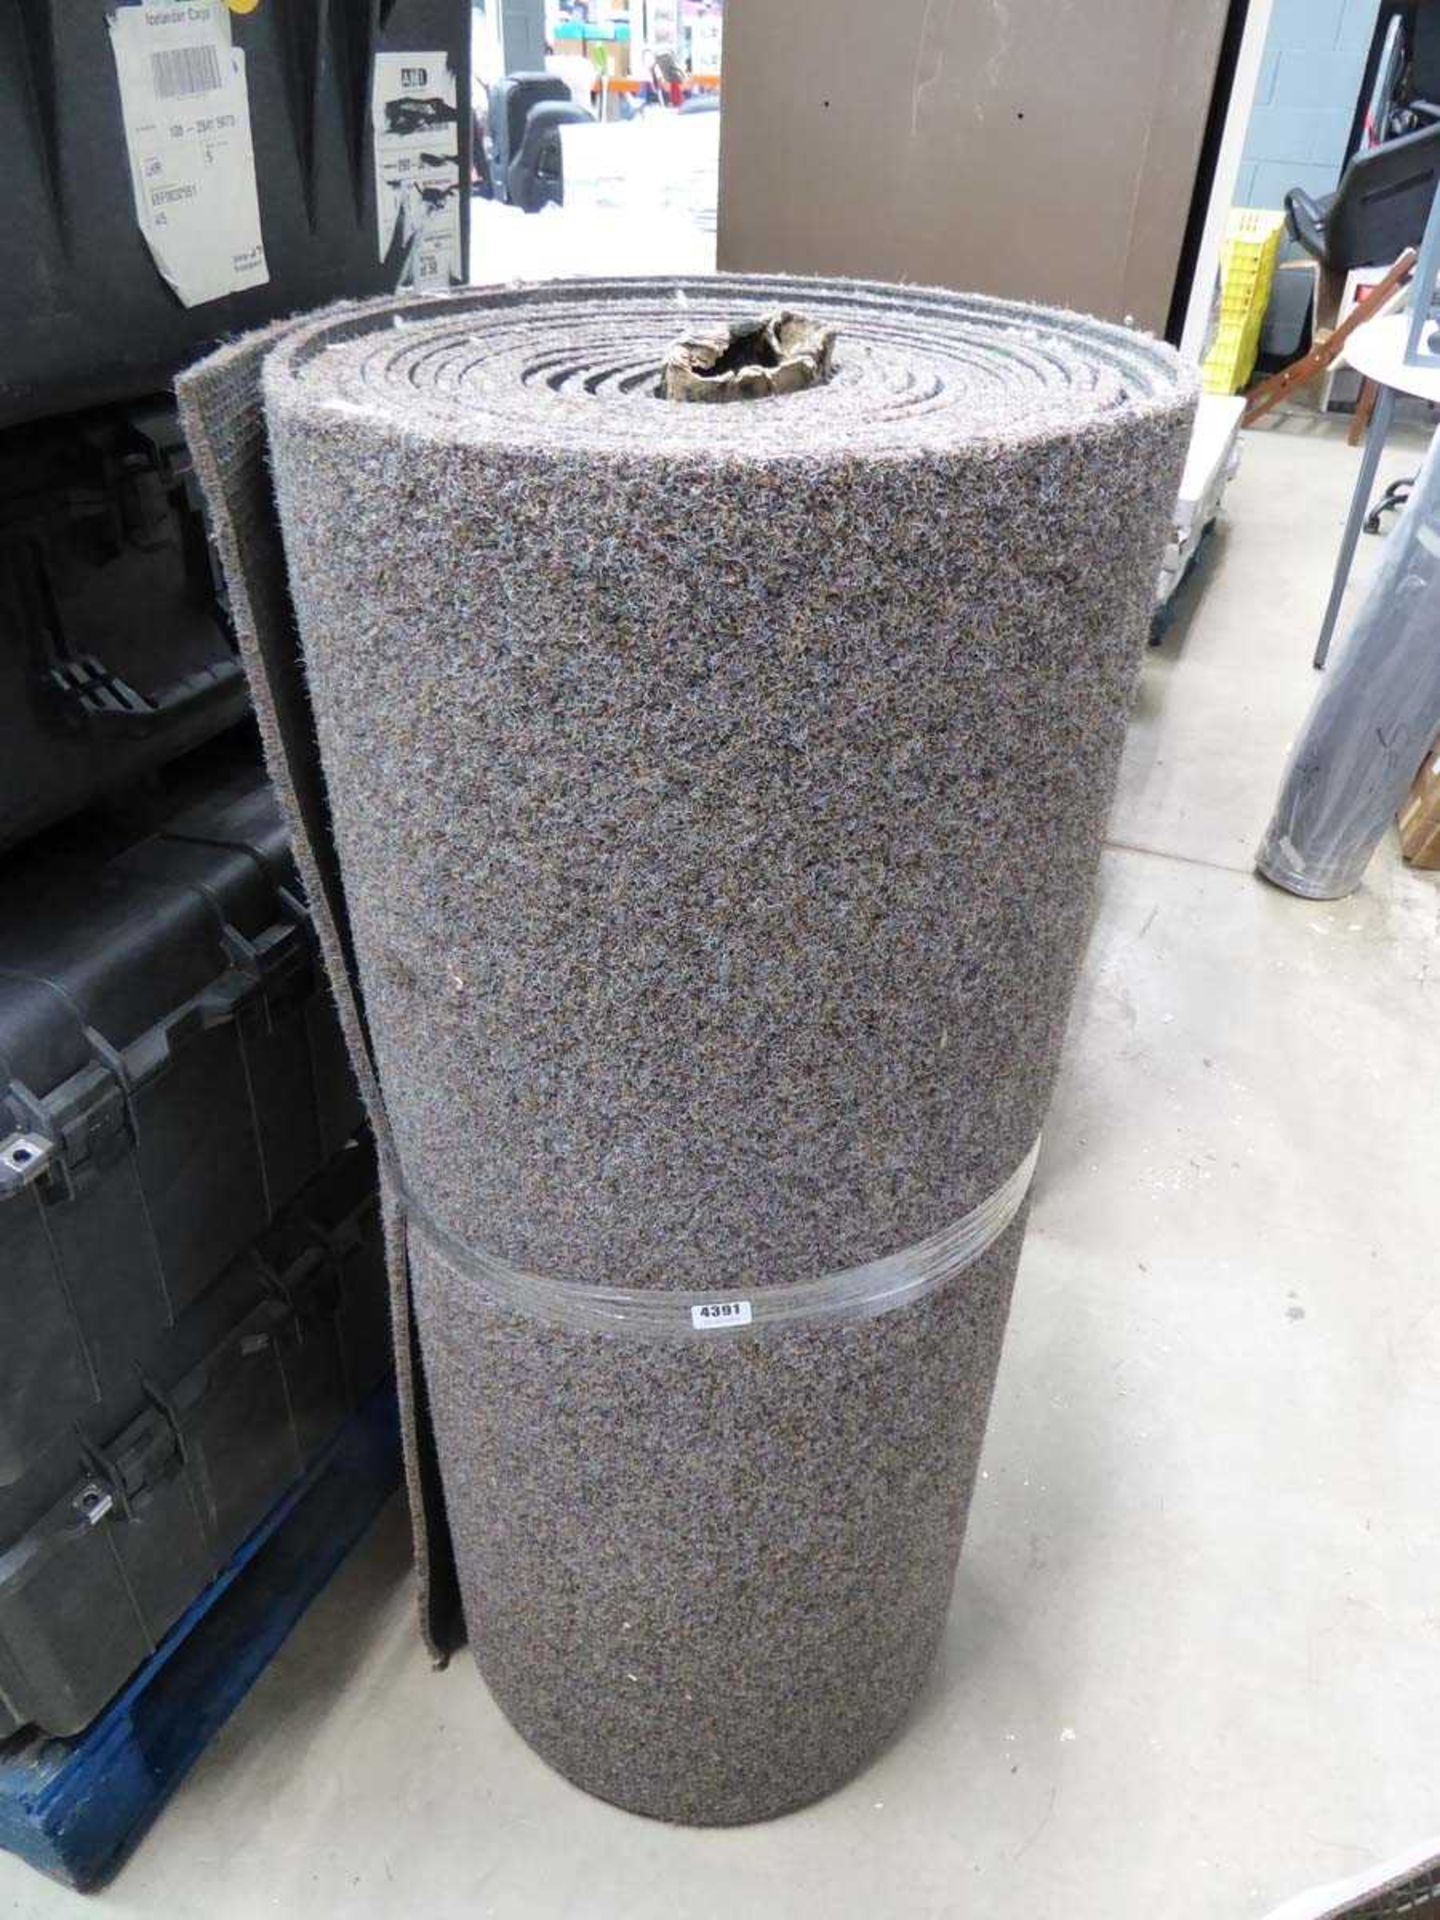 Small roll of heavy duty brown carpet